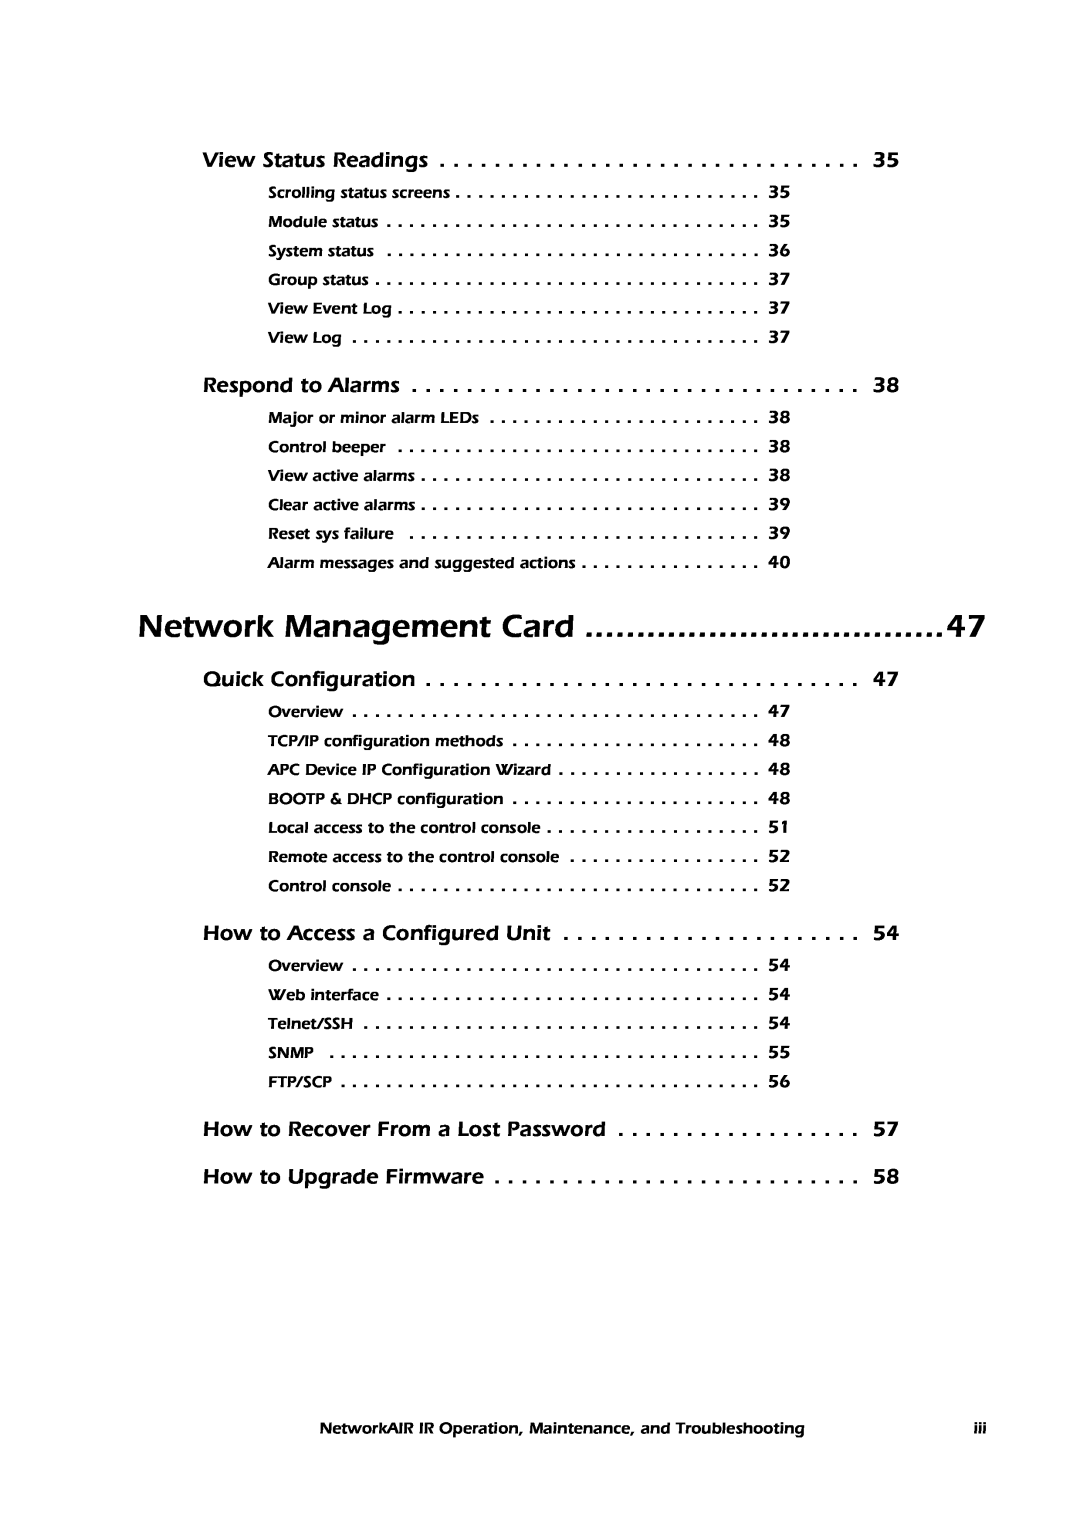 American Power Conversion Central Air Conditioning System manual Network Management Card 